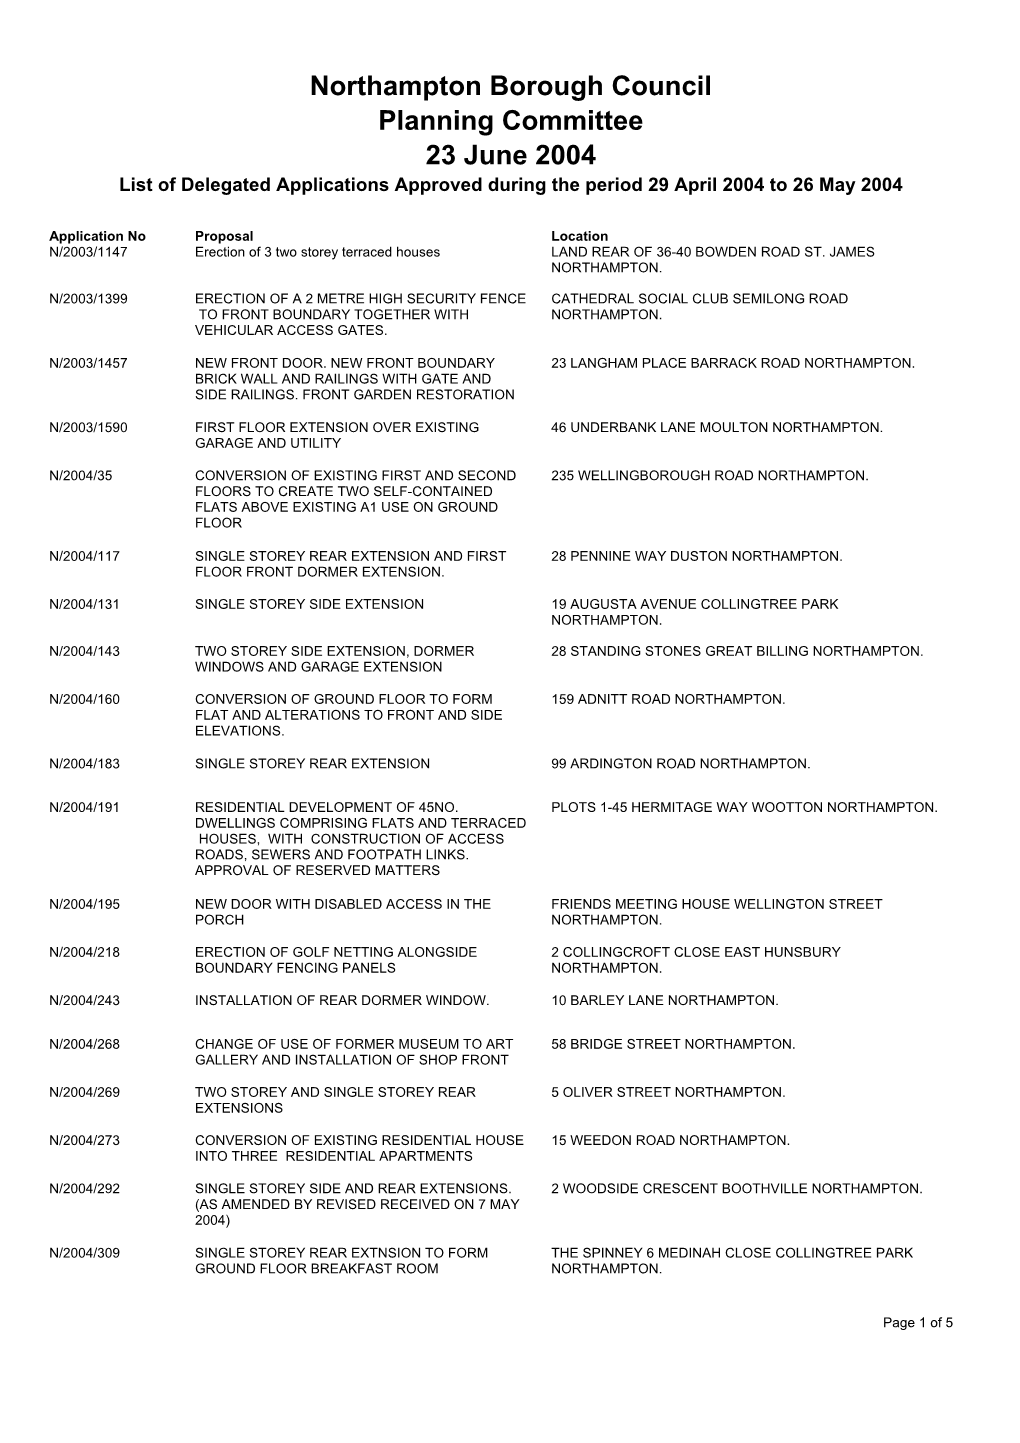 Northampton Borough Council Planning Committee 23 June 2004 List of Delegated Applications Approved During the Period 29 April 2004 to 26 May 2004